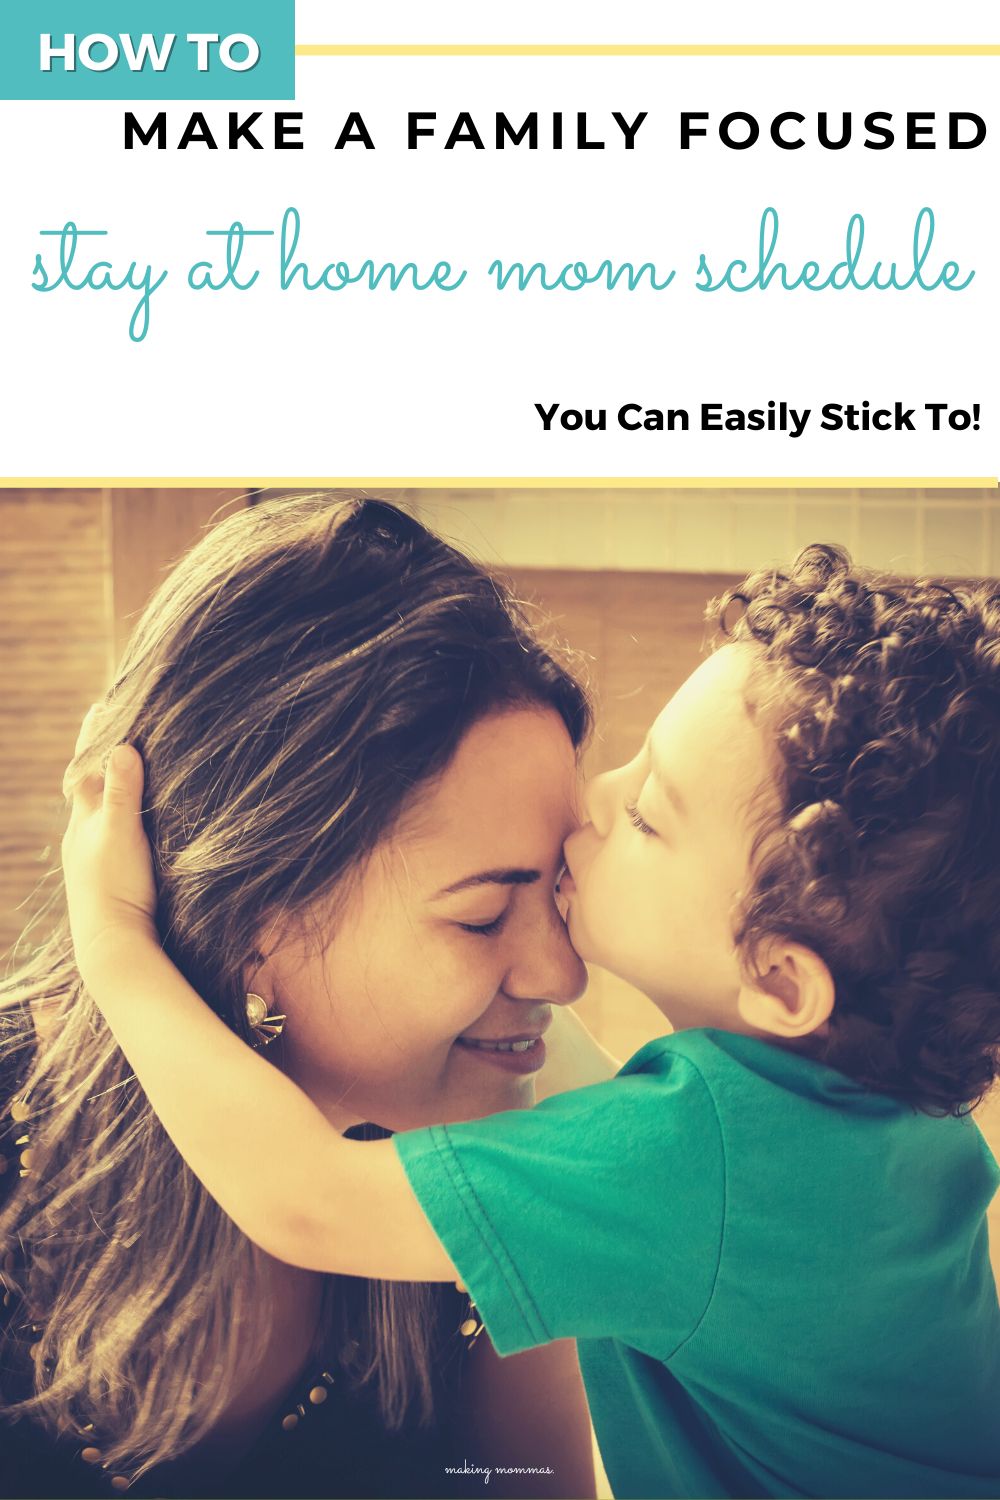 pin image of how to make a family focused stay at home mom schedule you can easily stick to